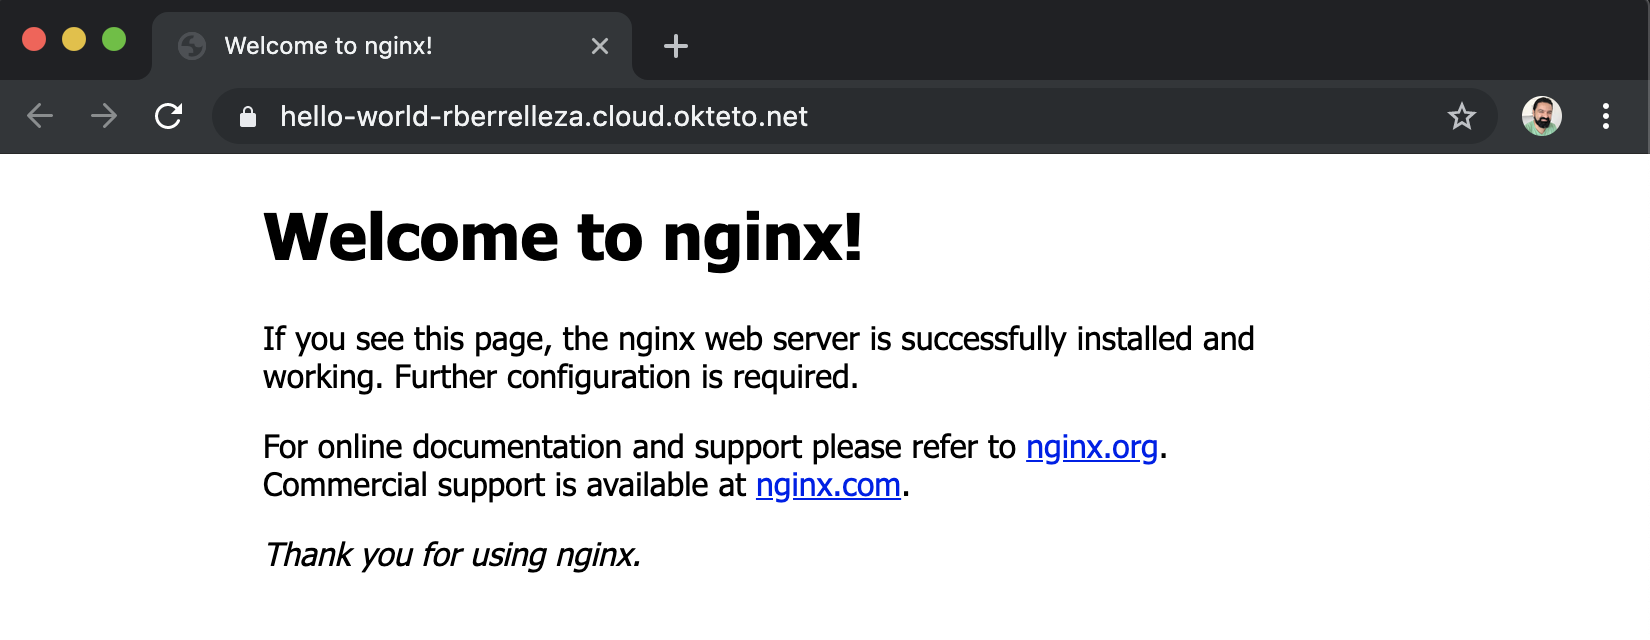 NGINX instance deployed with Helm 3